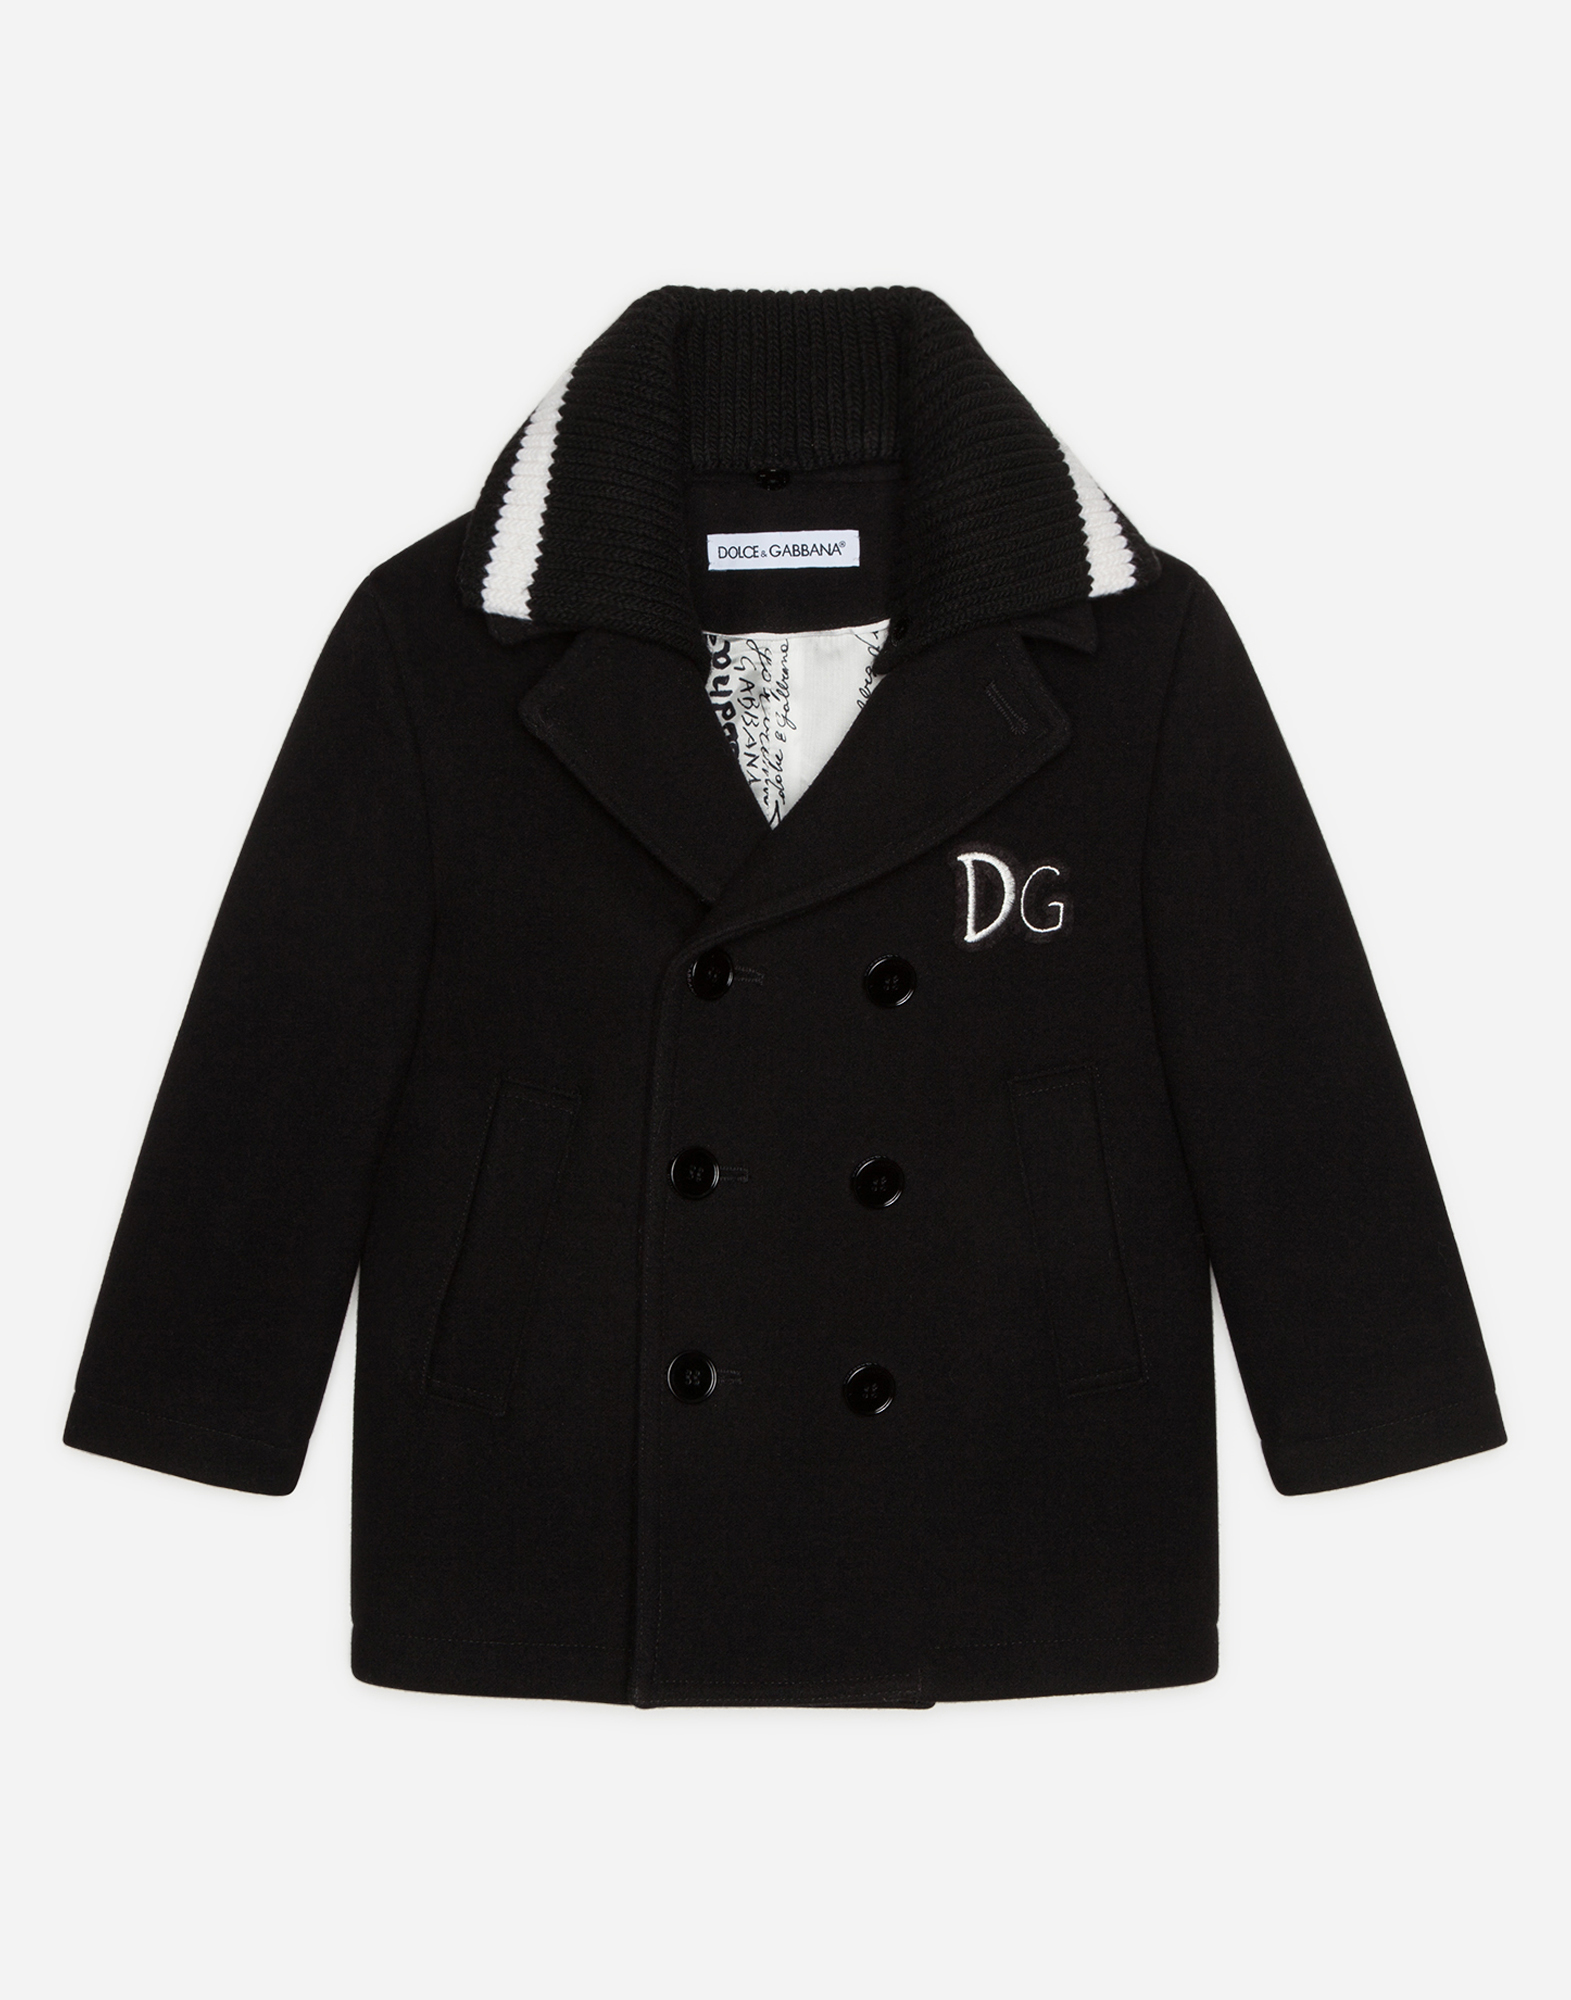 Broadcloth pea coat with DG patch in Black